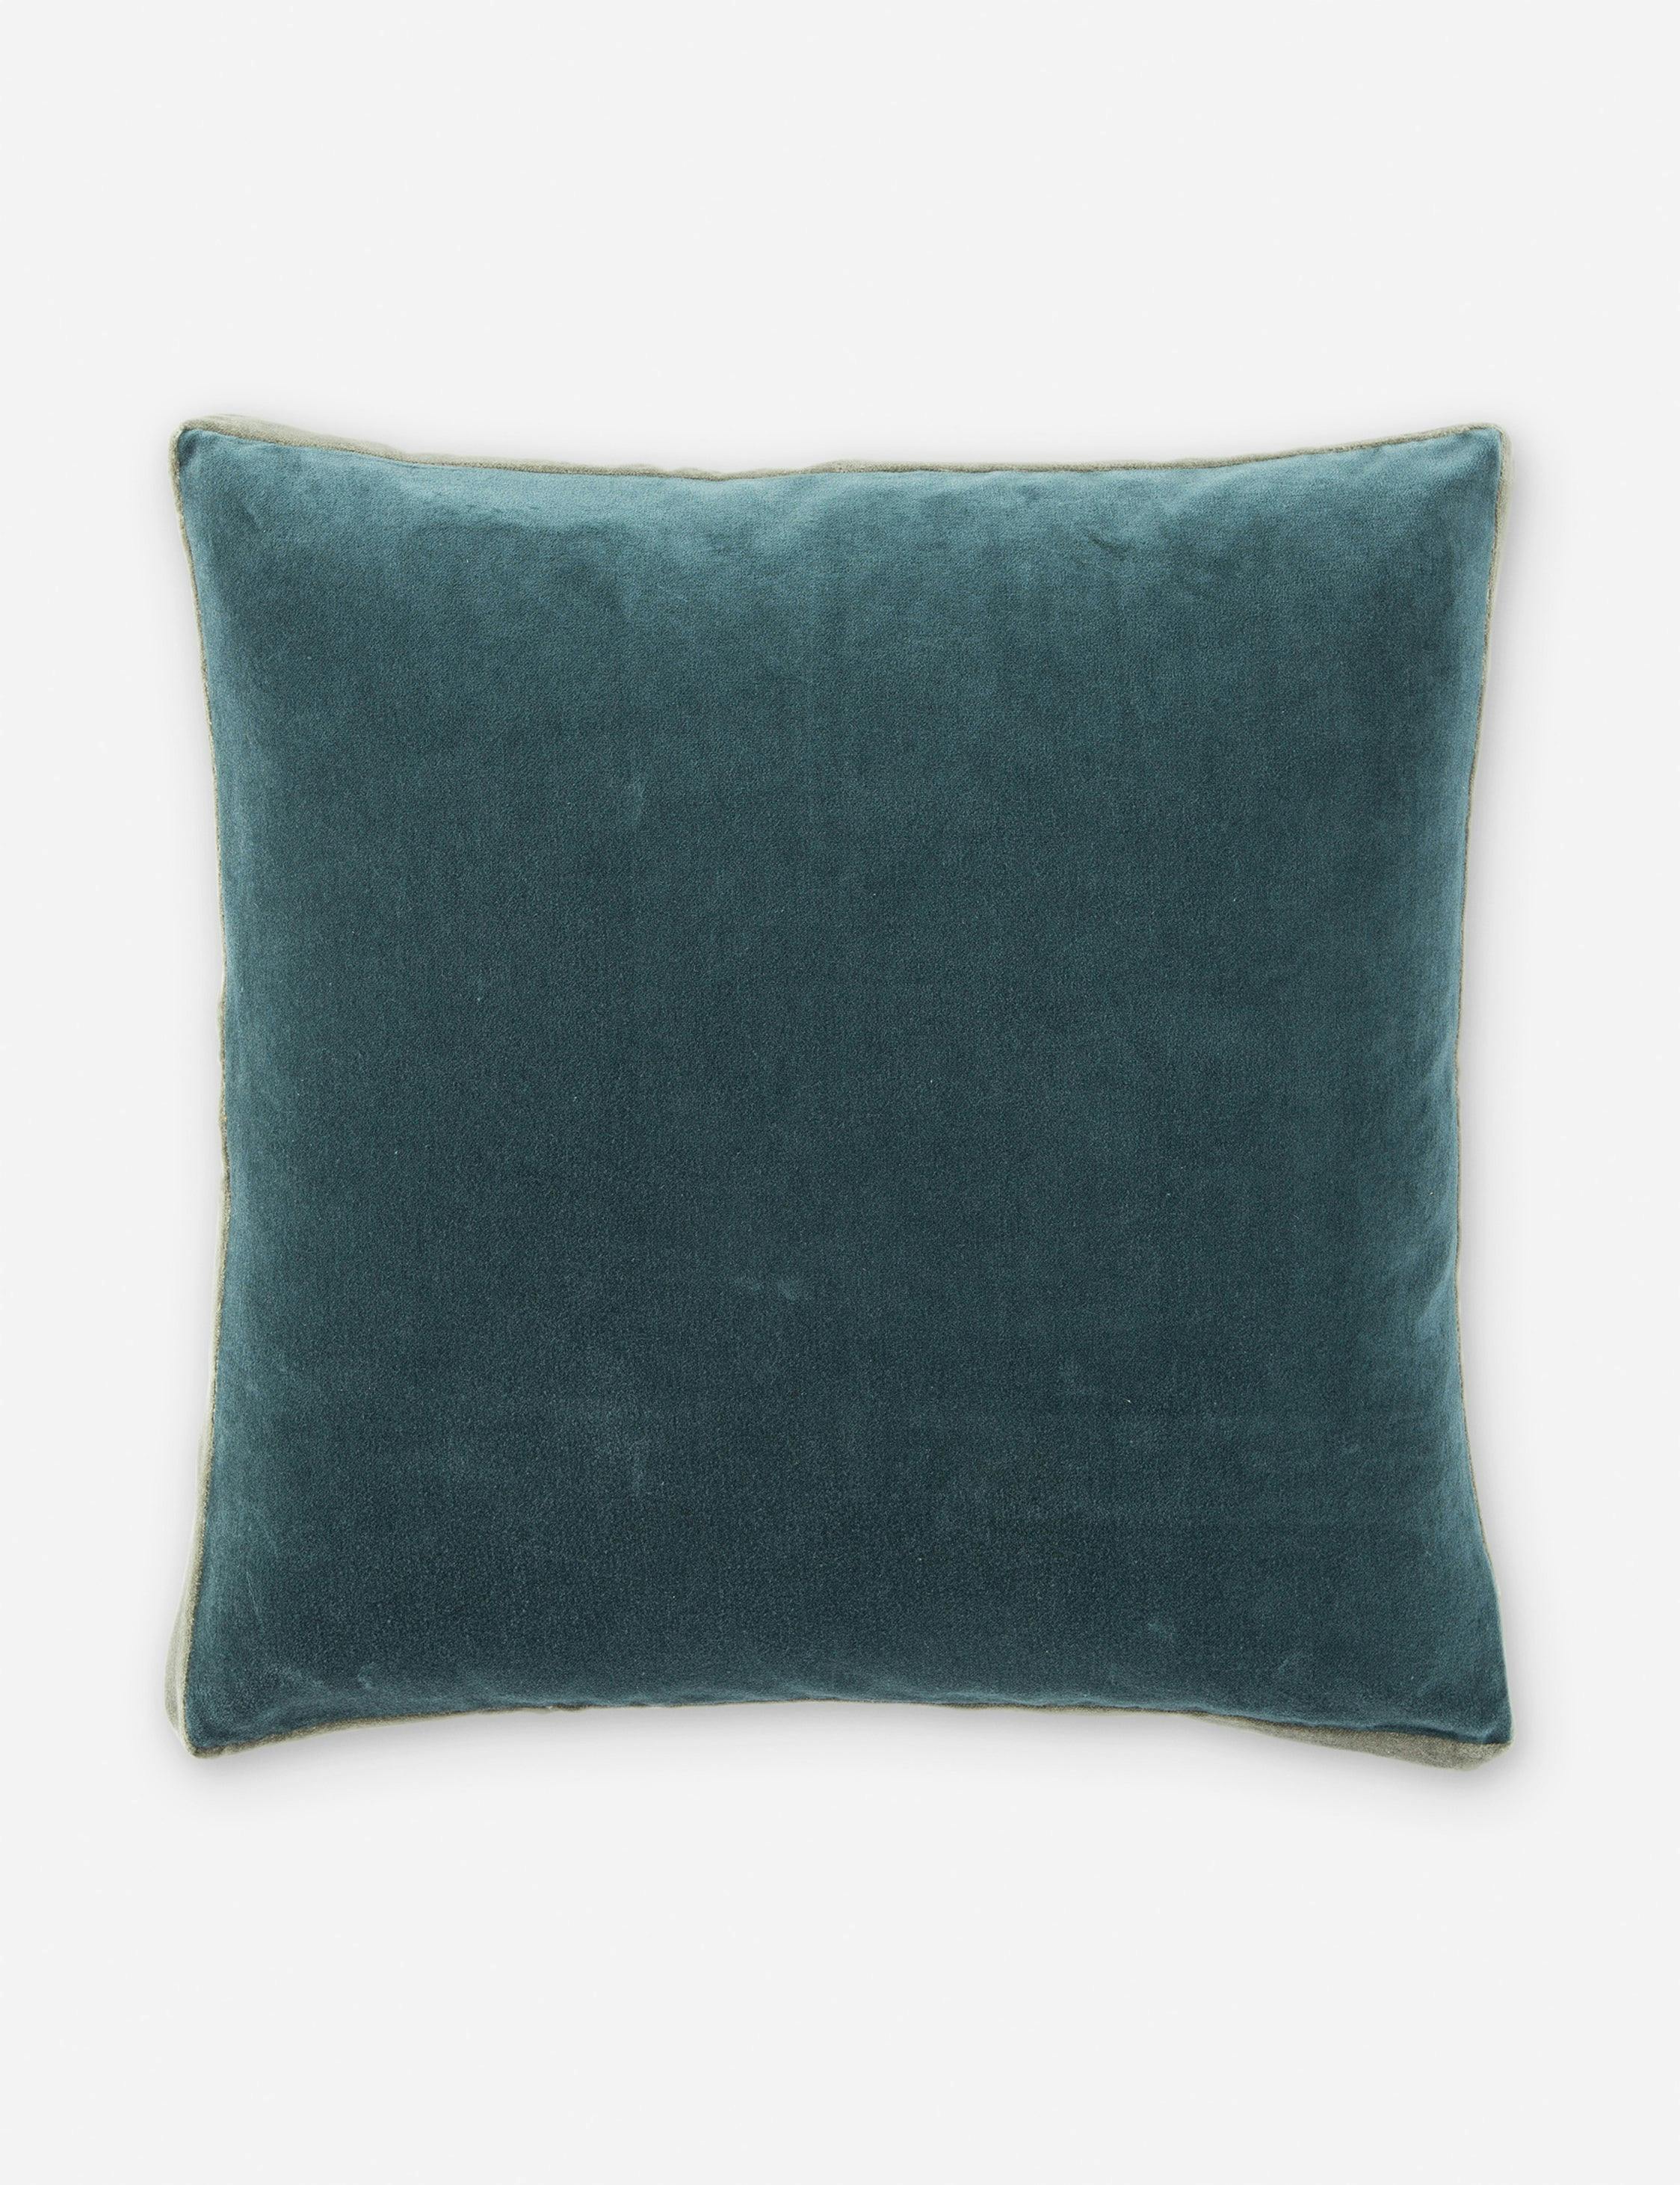 Clune Pillow - Teal and Gray / Polyester